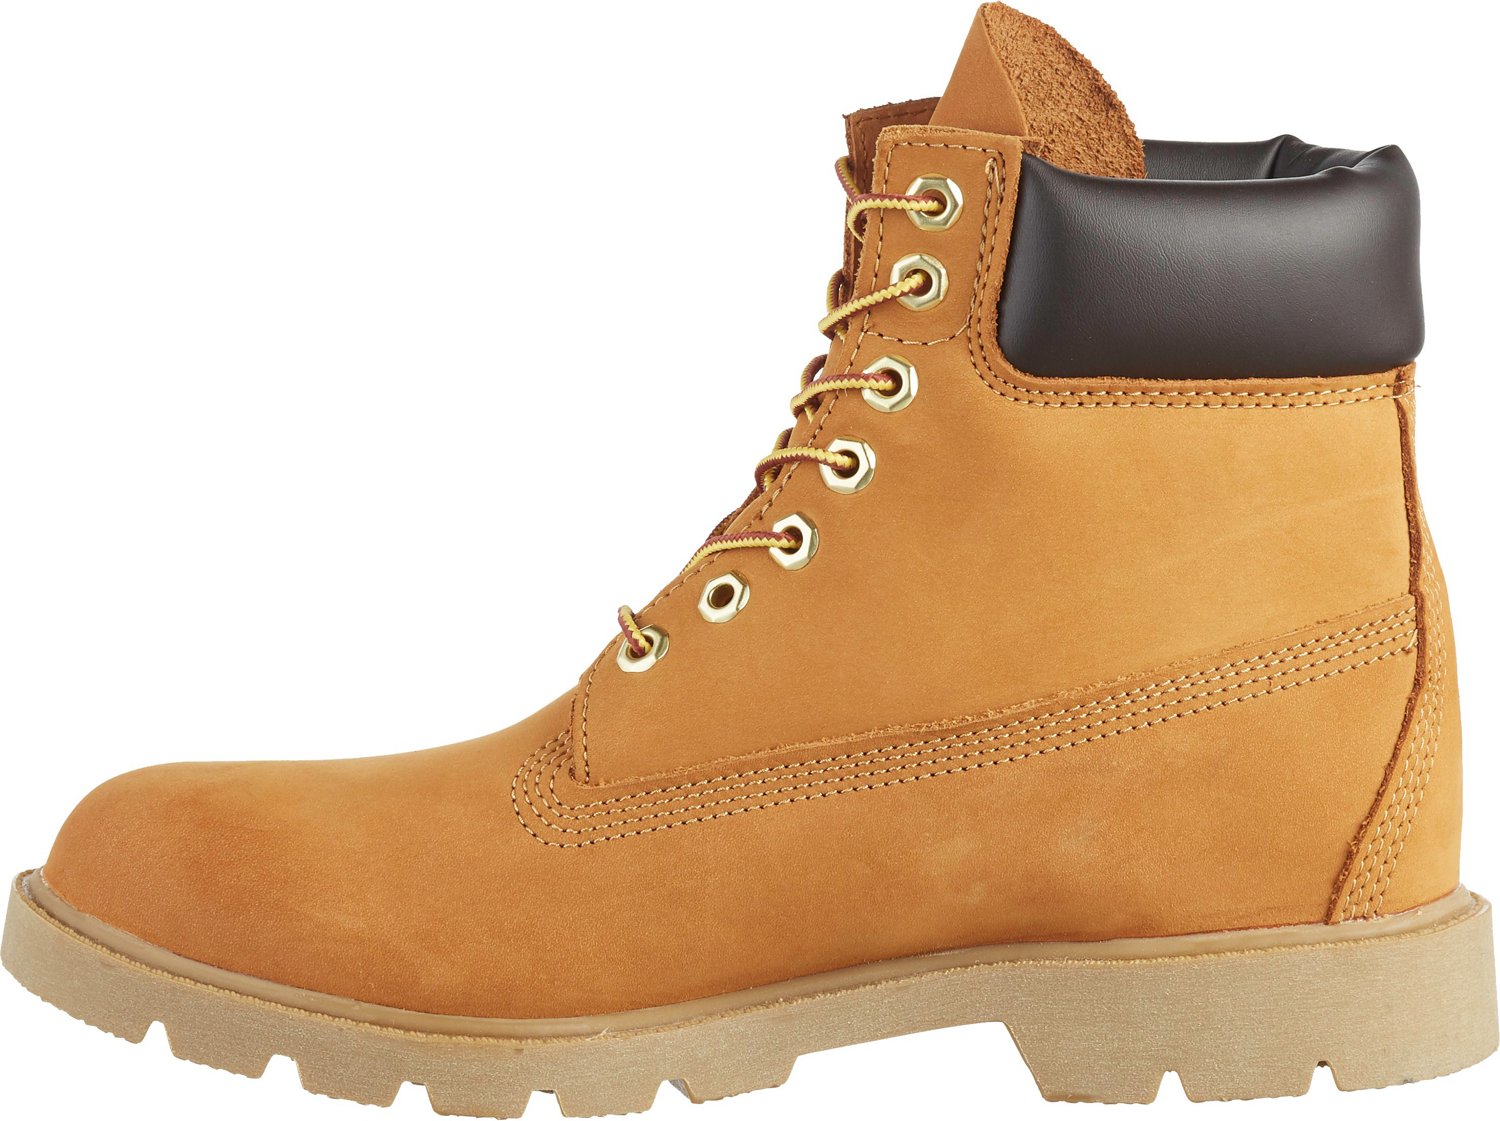 Timberland Men's Classic 6 inch Boots | Free Shipping at Academy